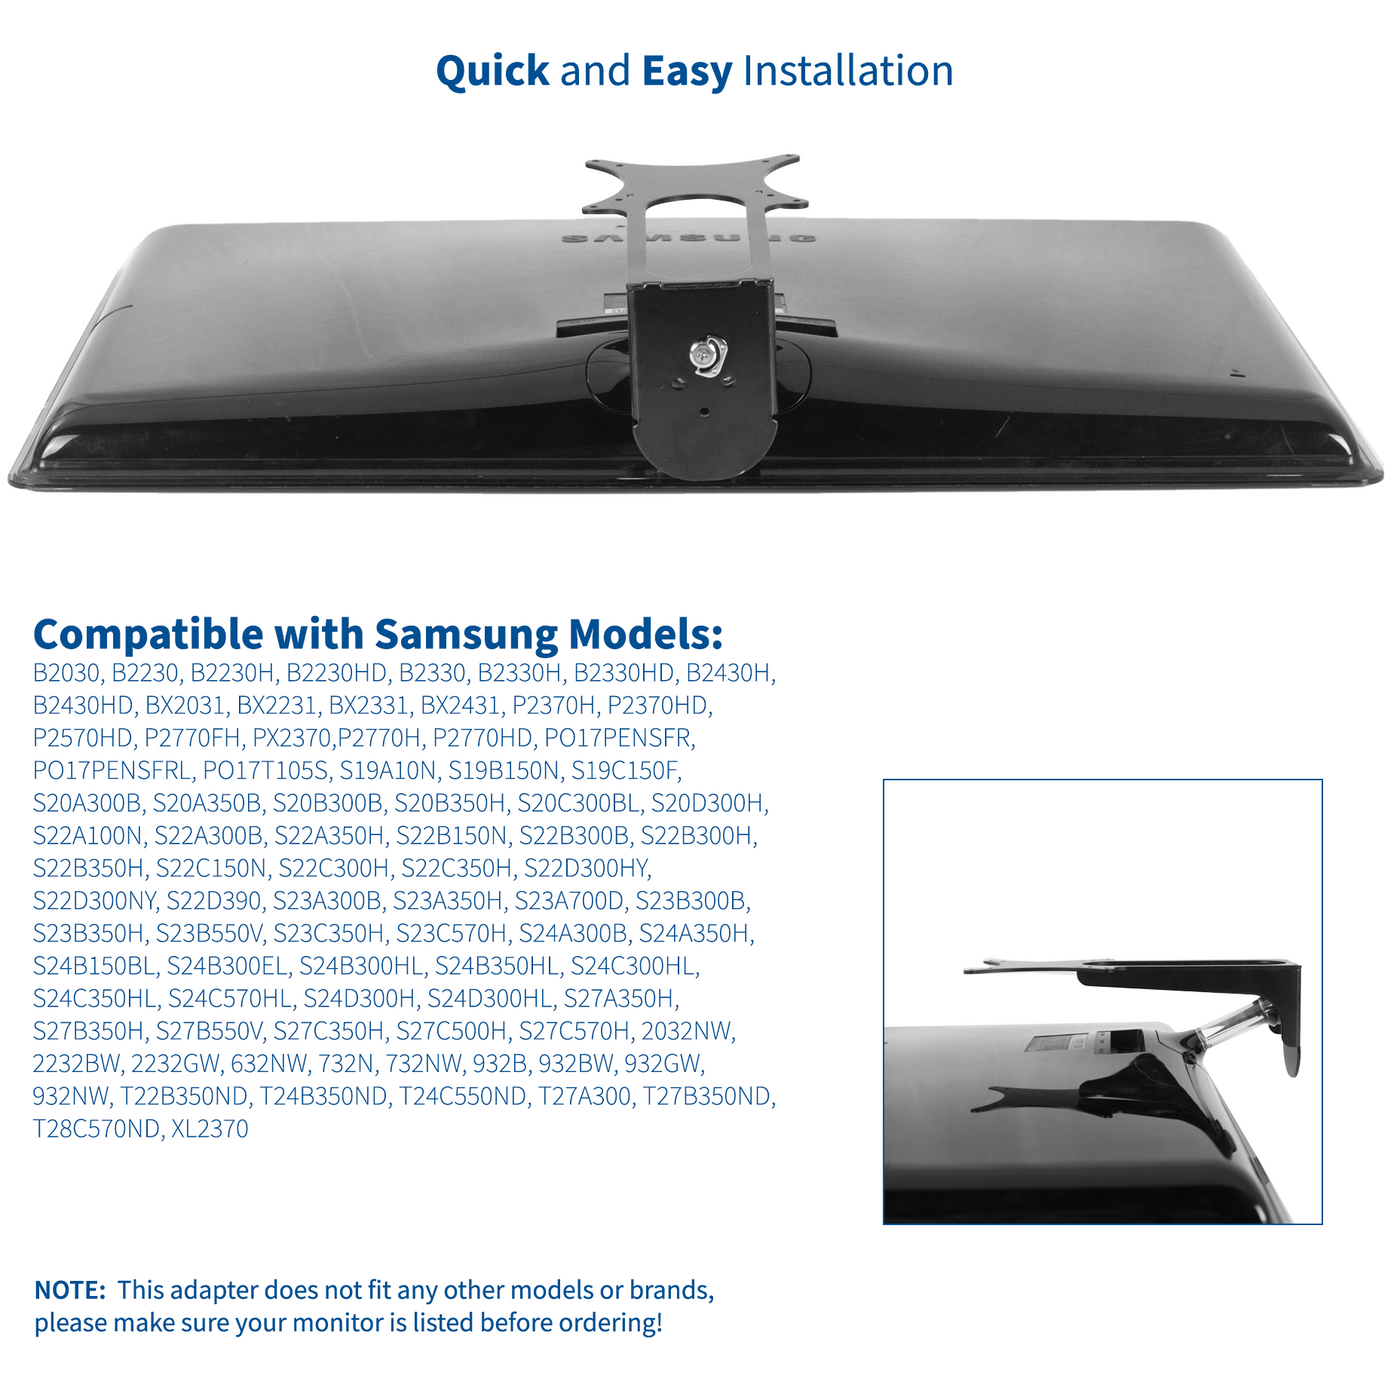 Solid Samsung monitor mount VESA adapter bracket with simple quick easy install.